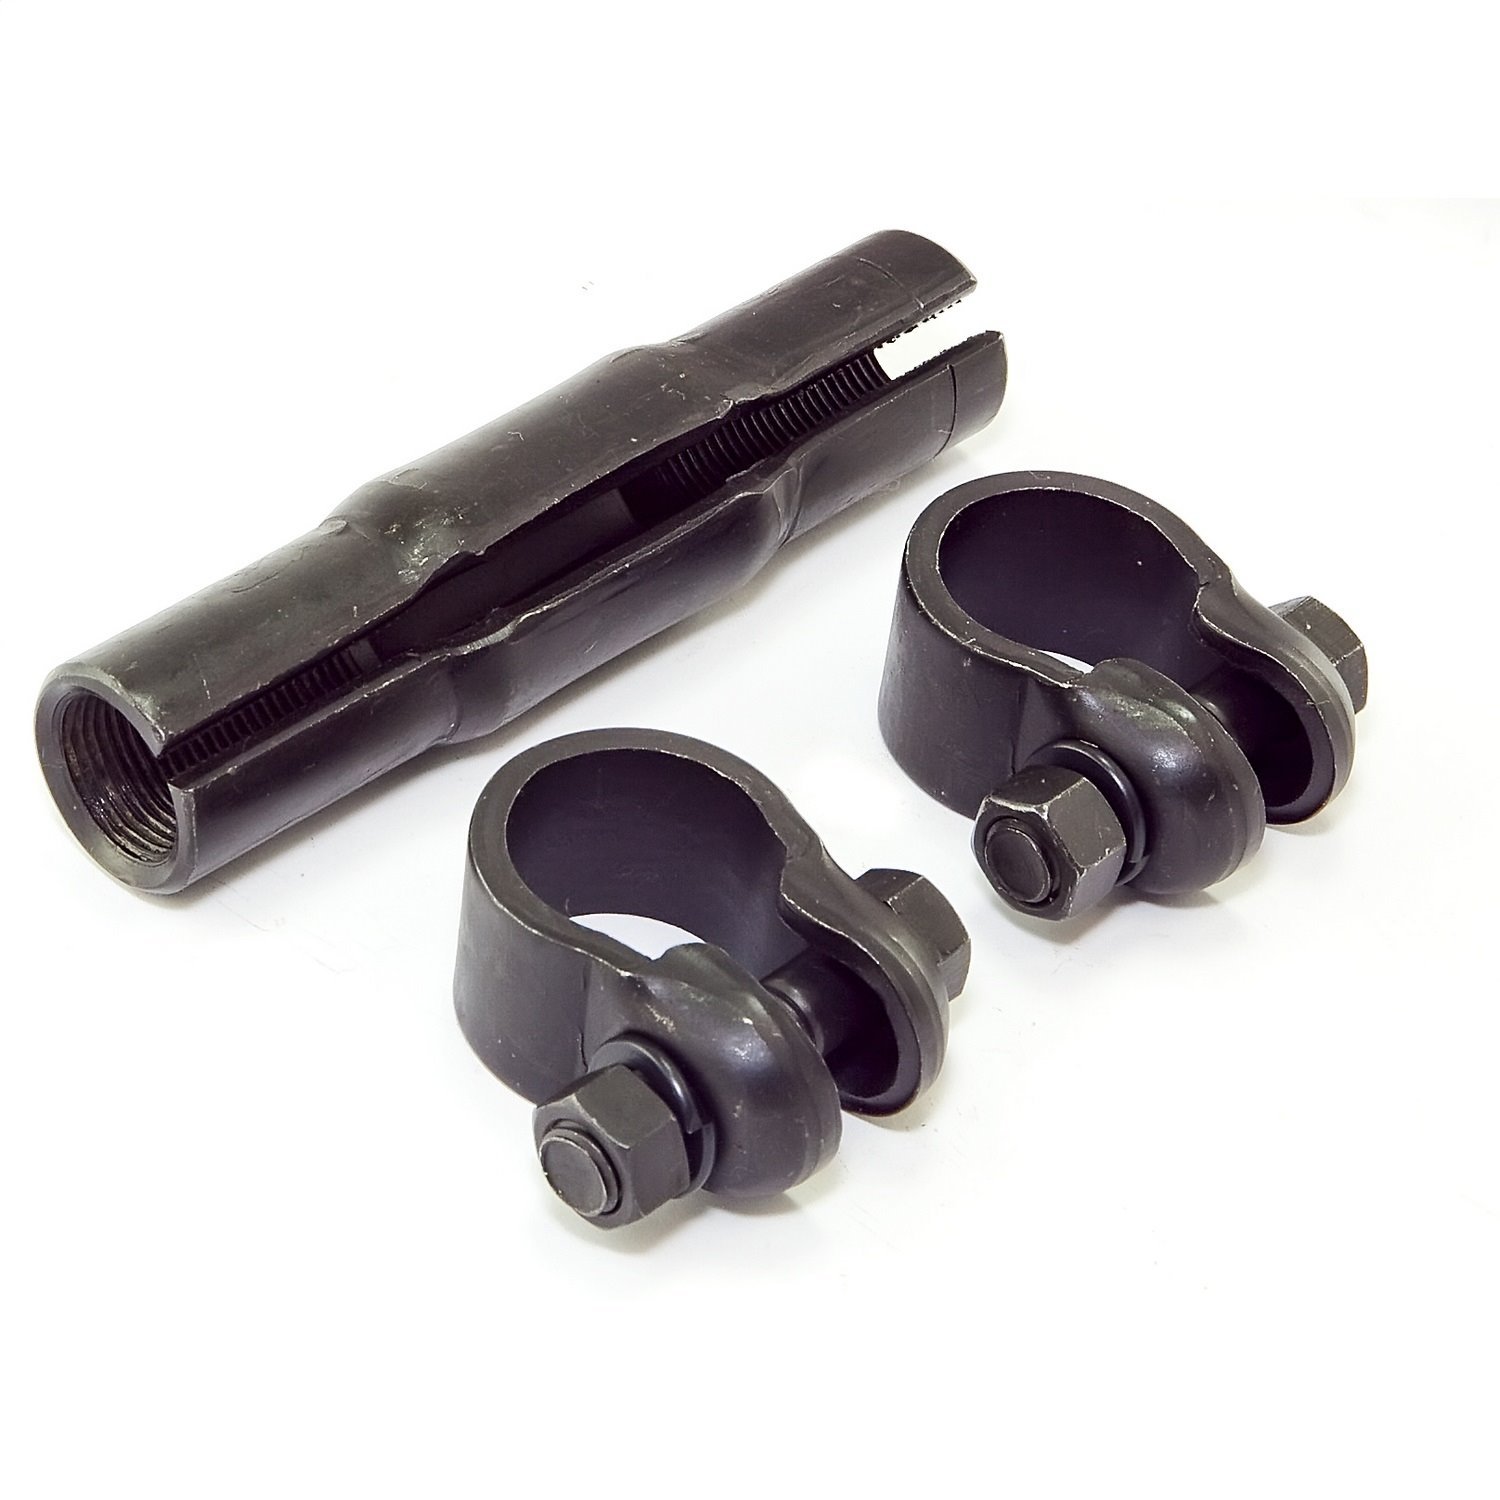 Replacement tie rod adjustment sleeve from Omix-ADA, Fits 84-90 Jeep Cherokee XJIncludes 2 clamps.